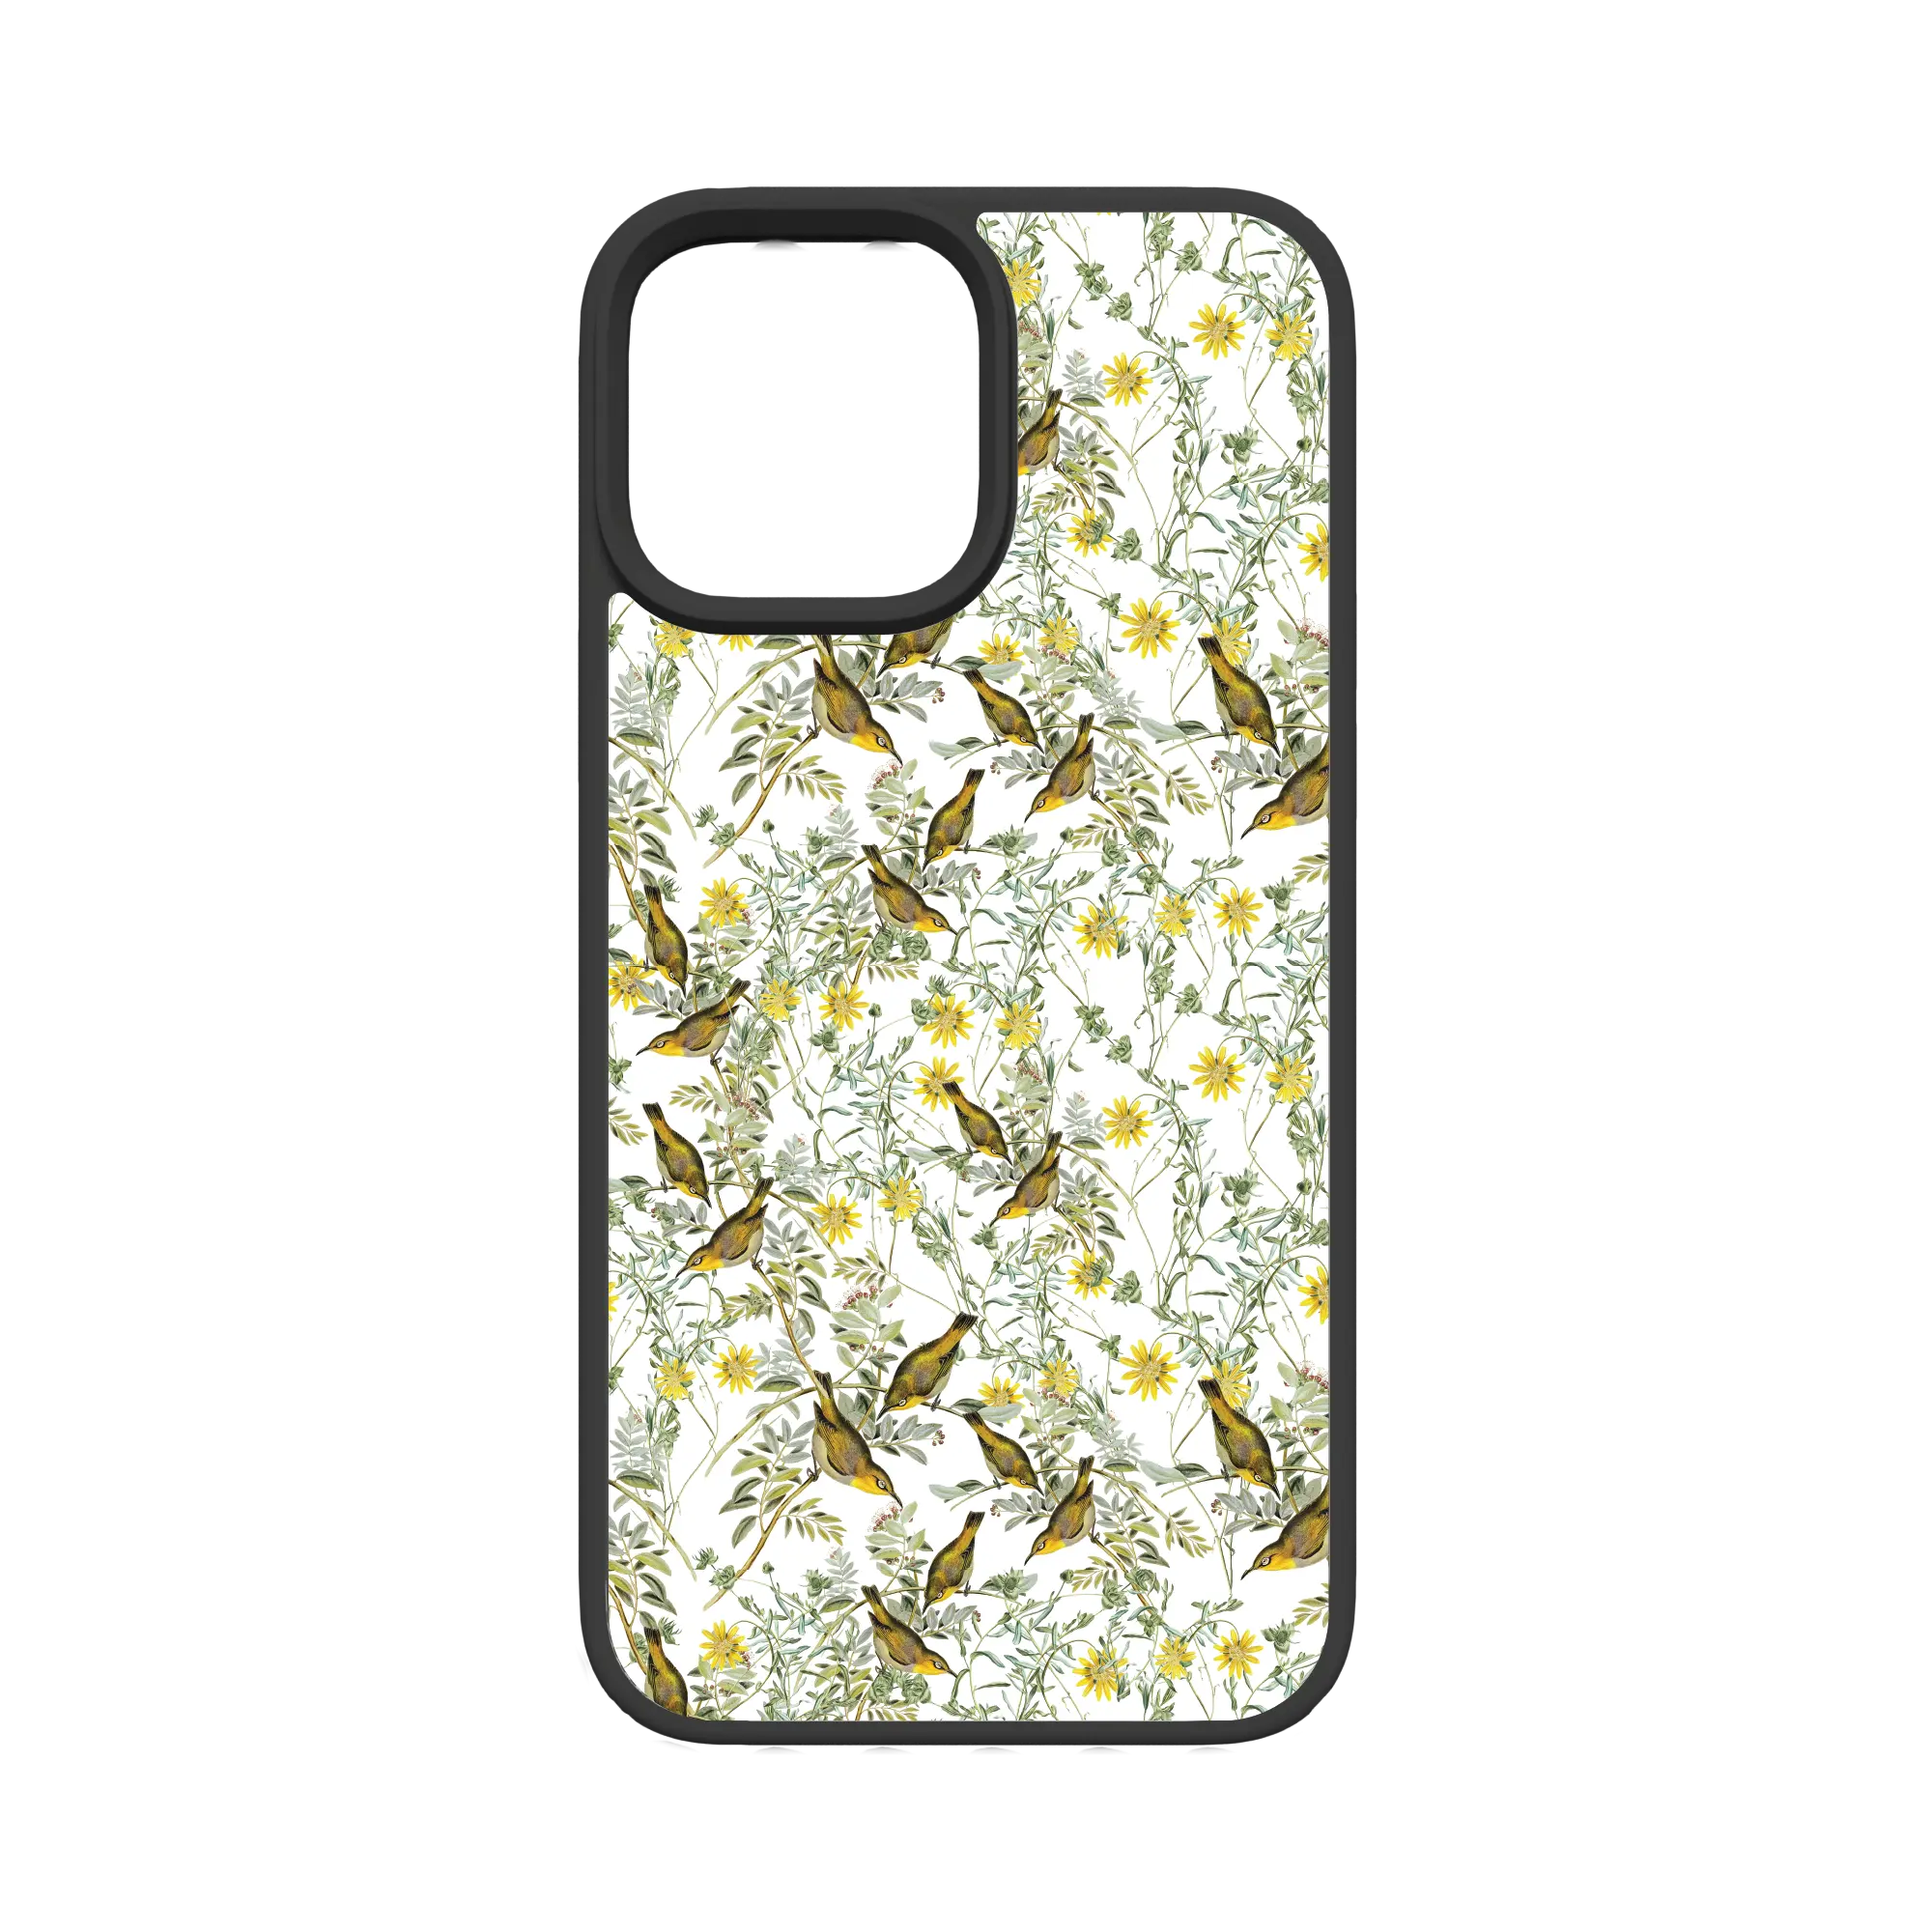 Apple-iPhone-12-Pro-Max-Crystal-Clear Nashville Warbler | Protective MagSafe Case | Birds and Bees Series for Apple iPhone 12 Series cellhelmet cellhelmet